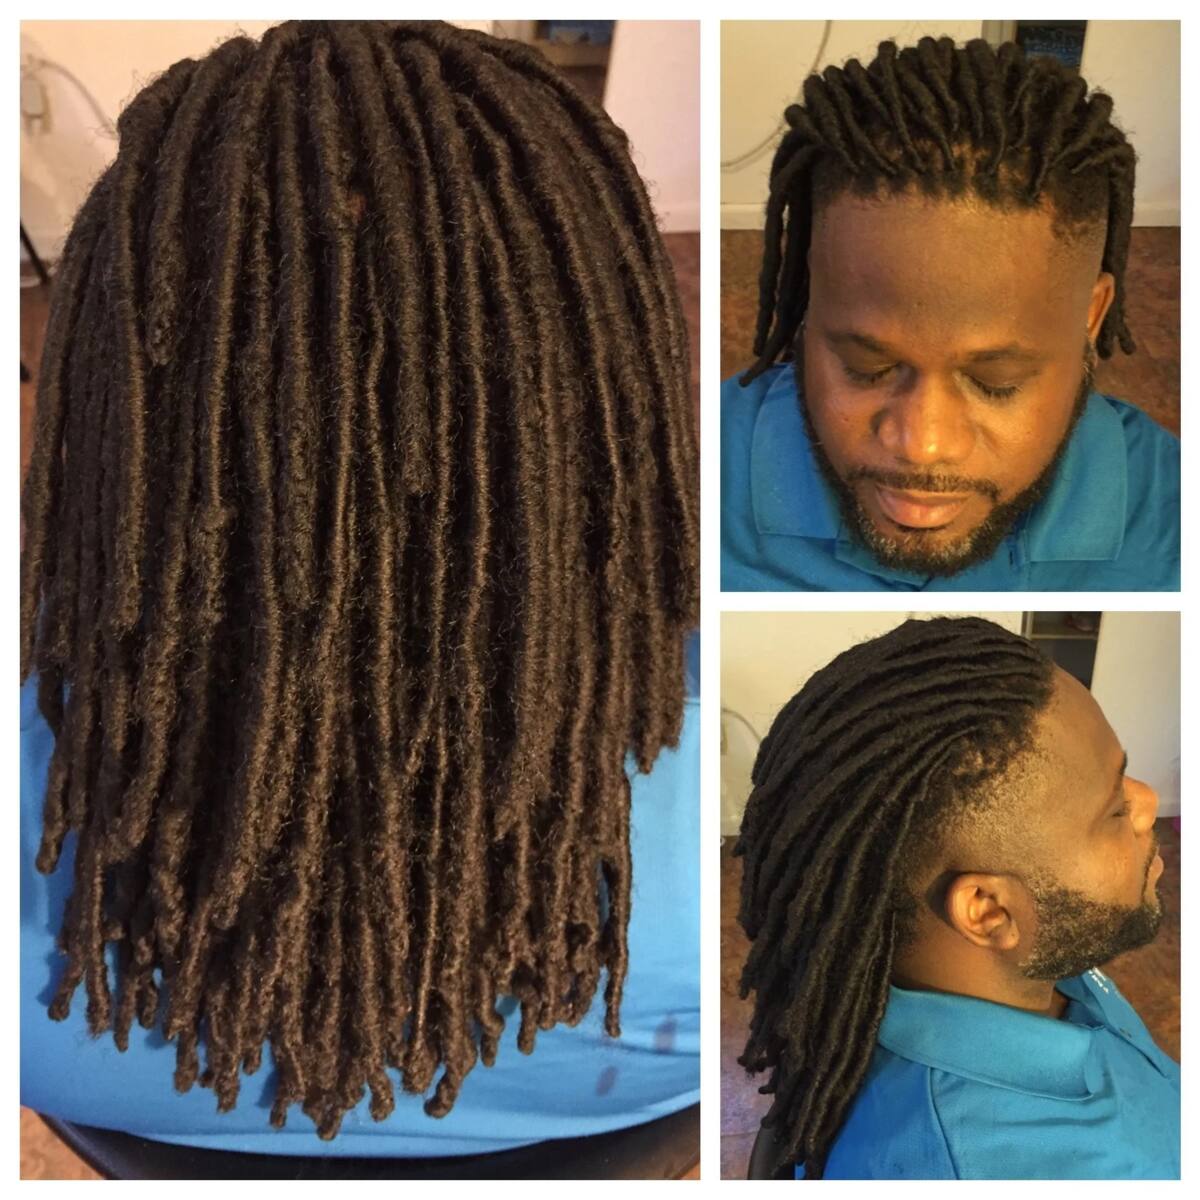 45 Unique Dread Hairstyle Ideas for Men | Dread hairstyles for men,  Dreadlock hairstyles for men, Dread hairstyles